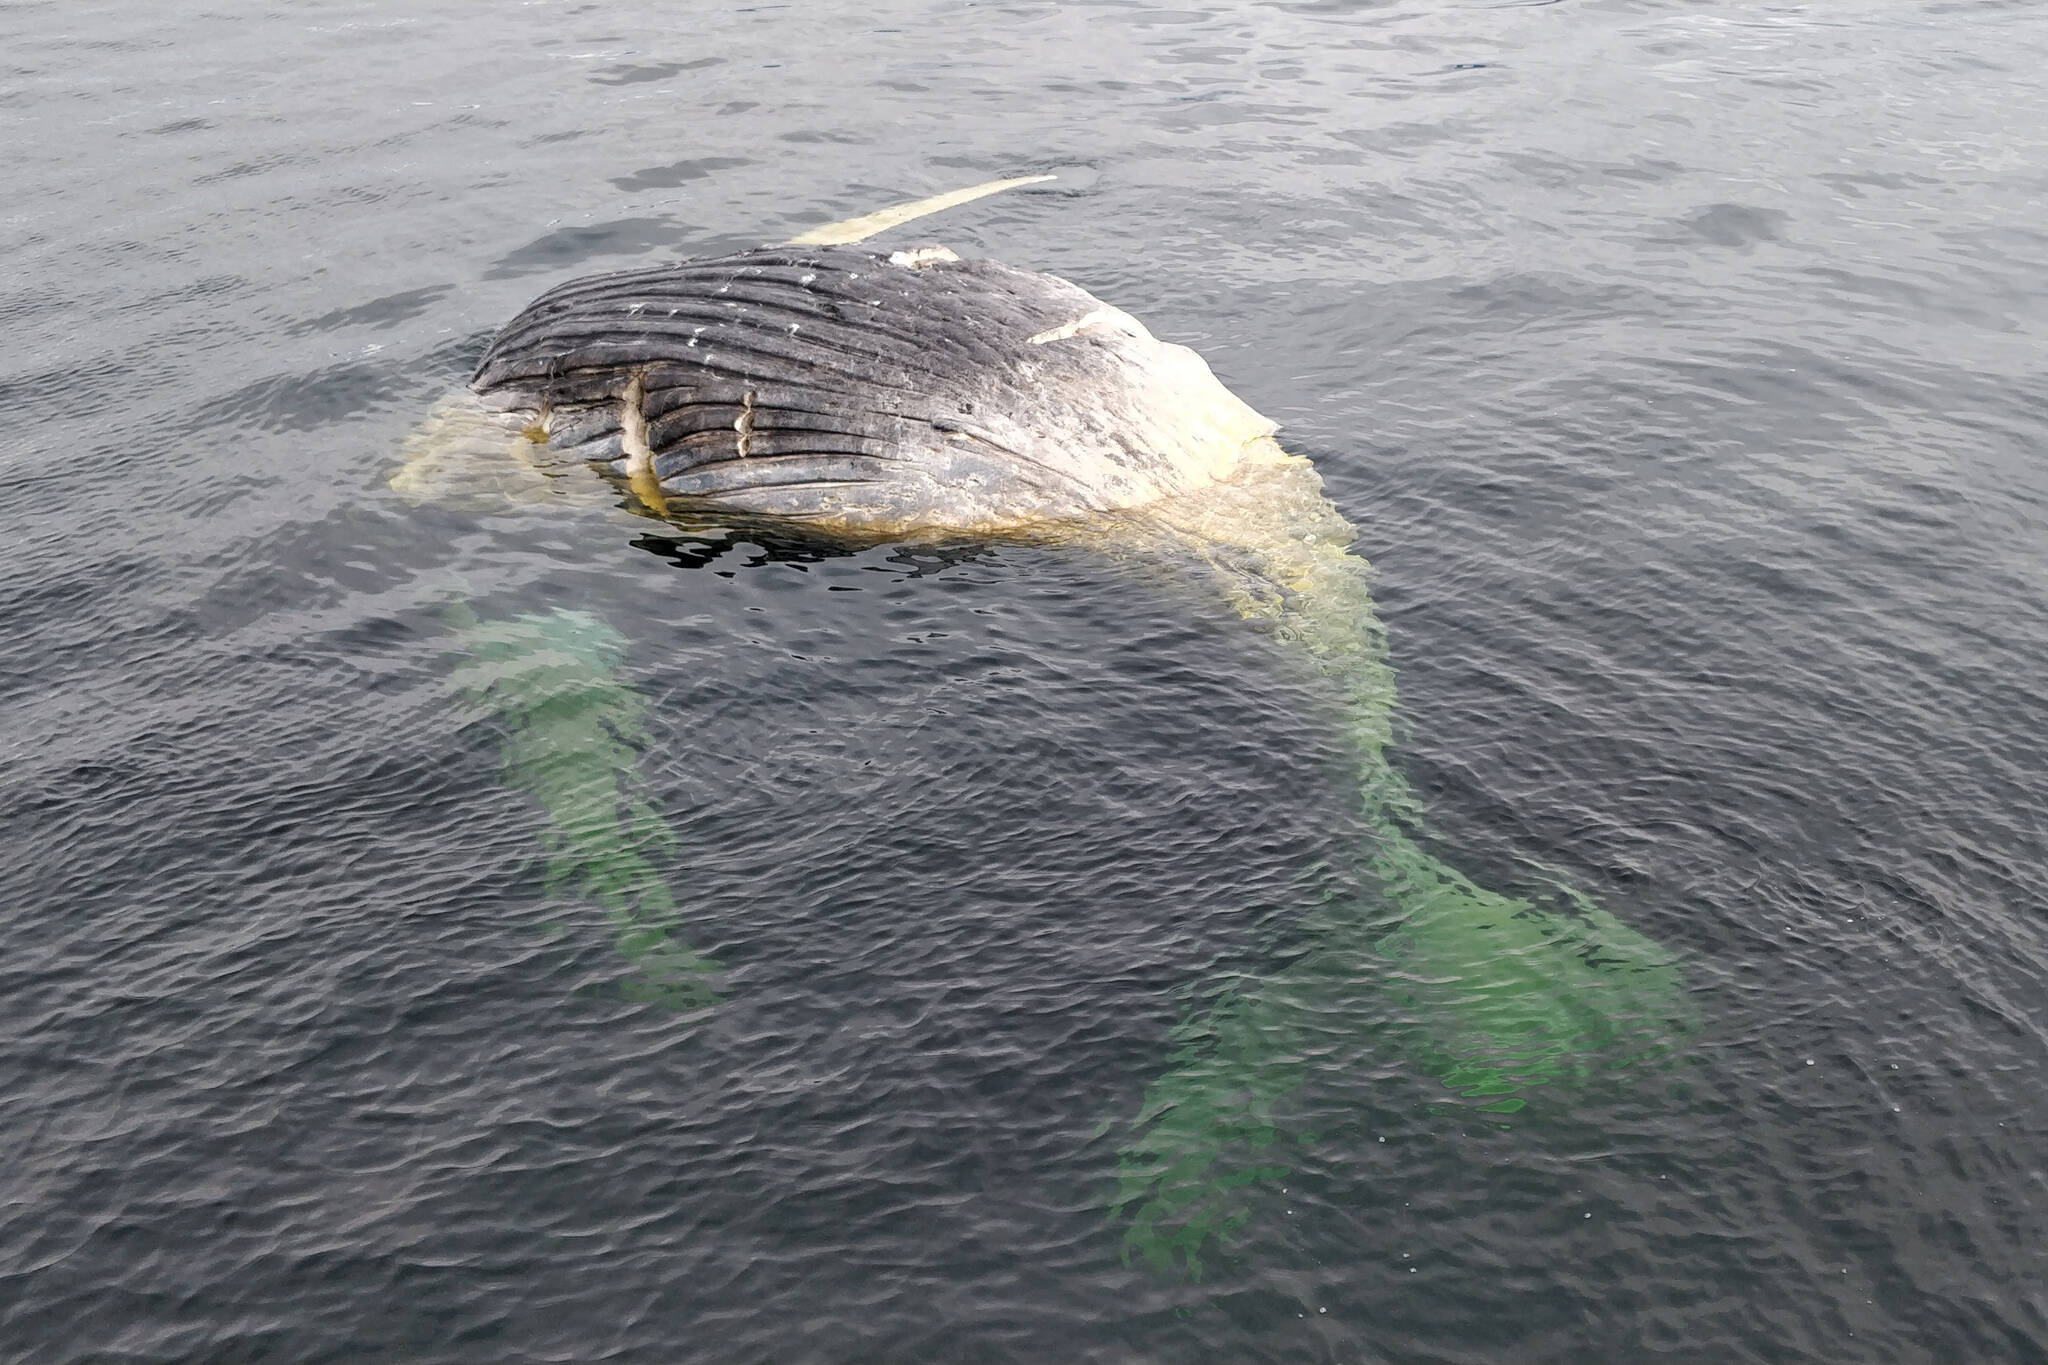 Larry Talley / Courtesy photo
A dead whale previously seen and necropsied on a small island near Angoon was spotted afloat on March 3. The cuts visible come from the necropsy effort, said a NOAA official.